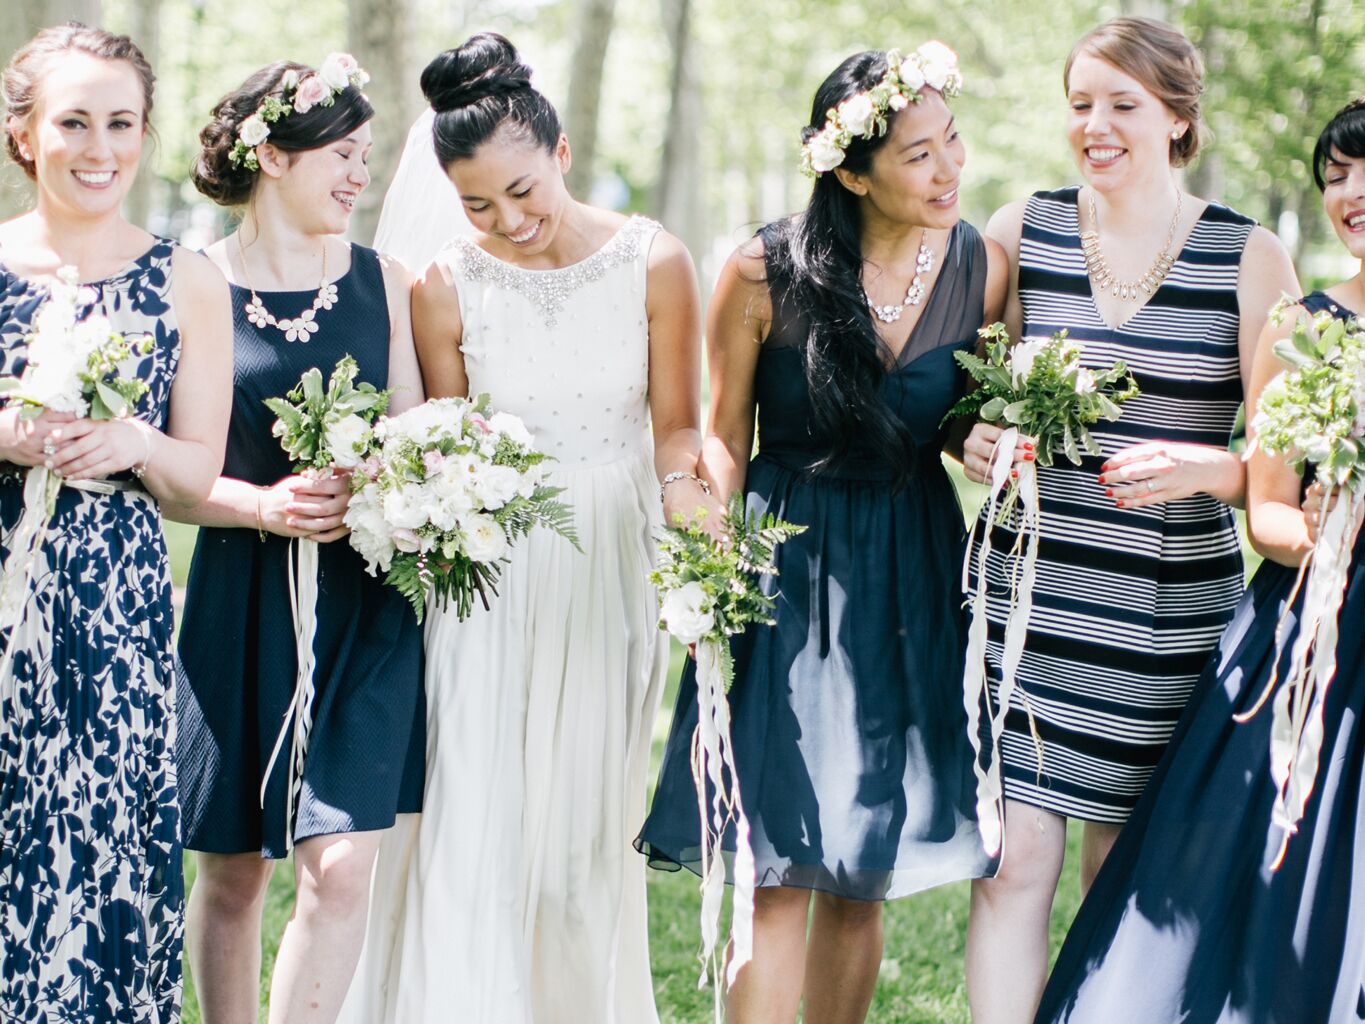 maid of honor and bridesmaid difference